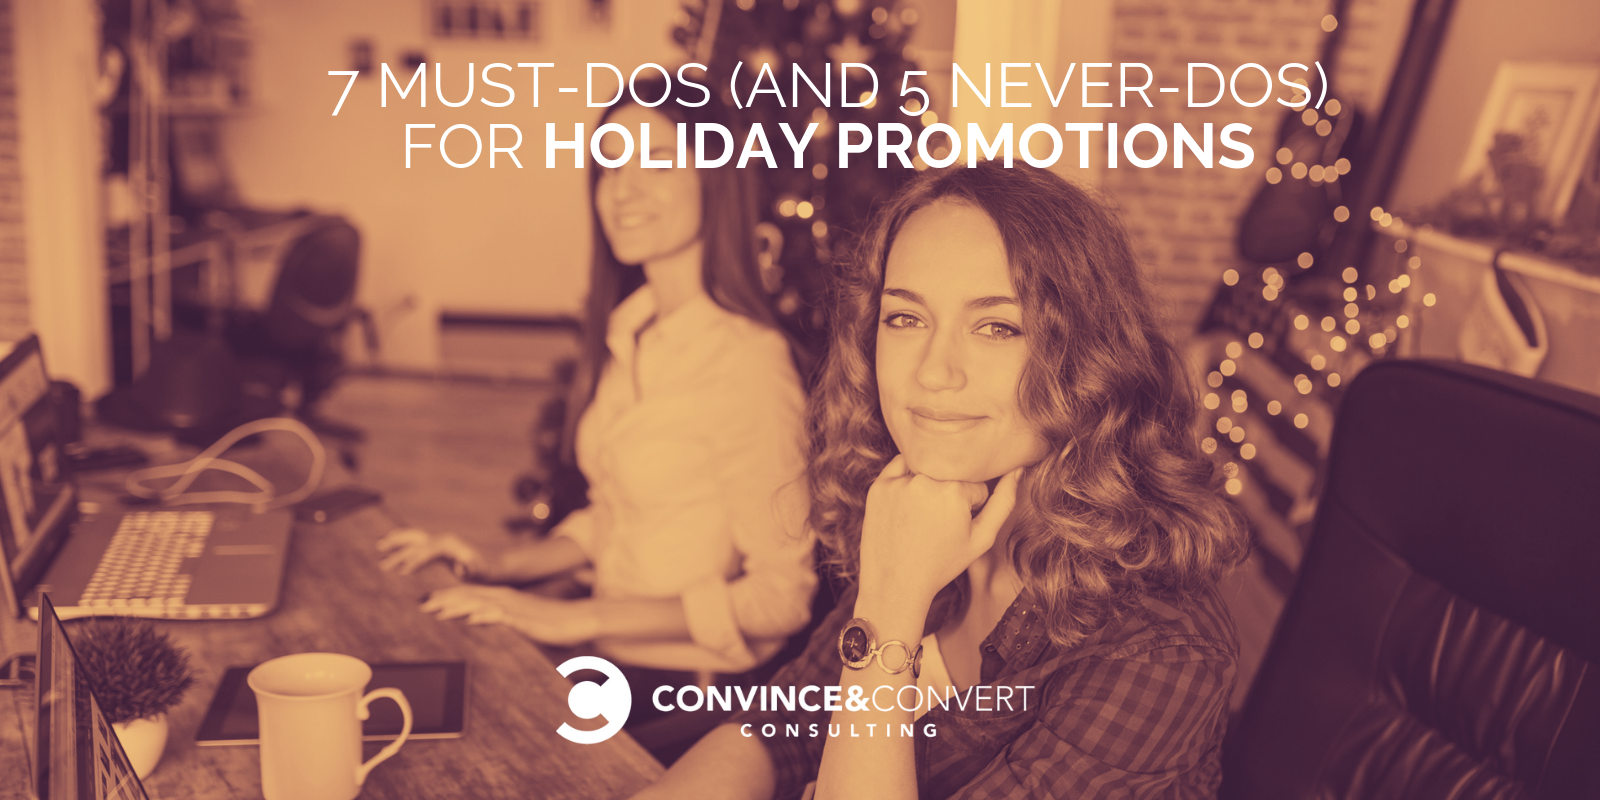 7 Must-Do's (and 5 Never-Dos) for Holiday Promotions